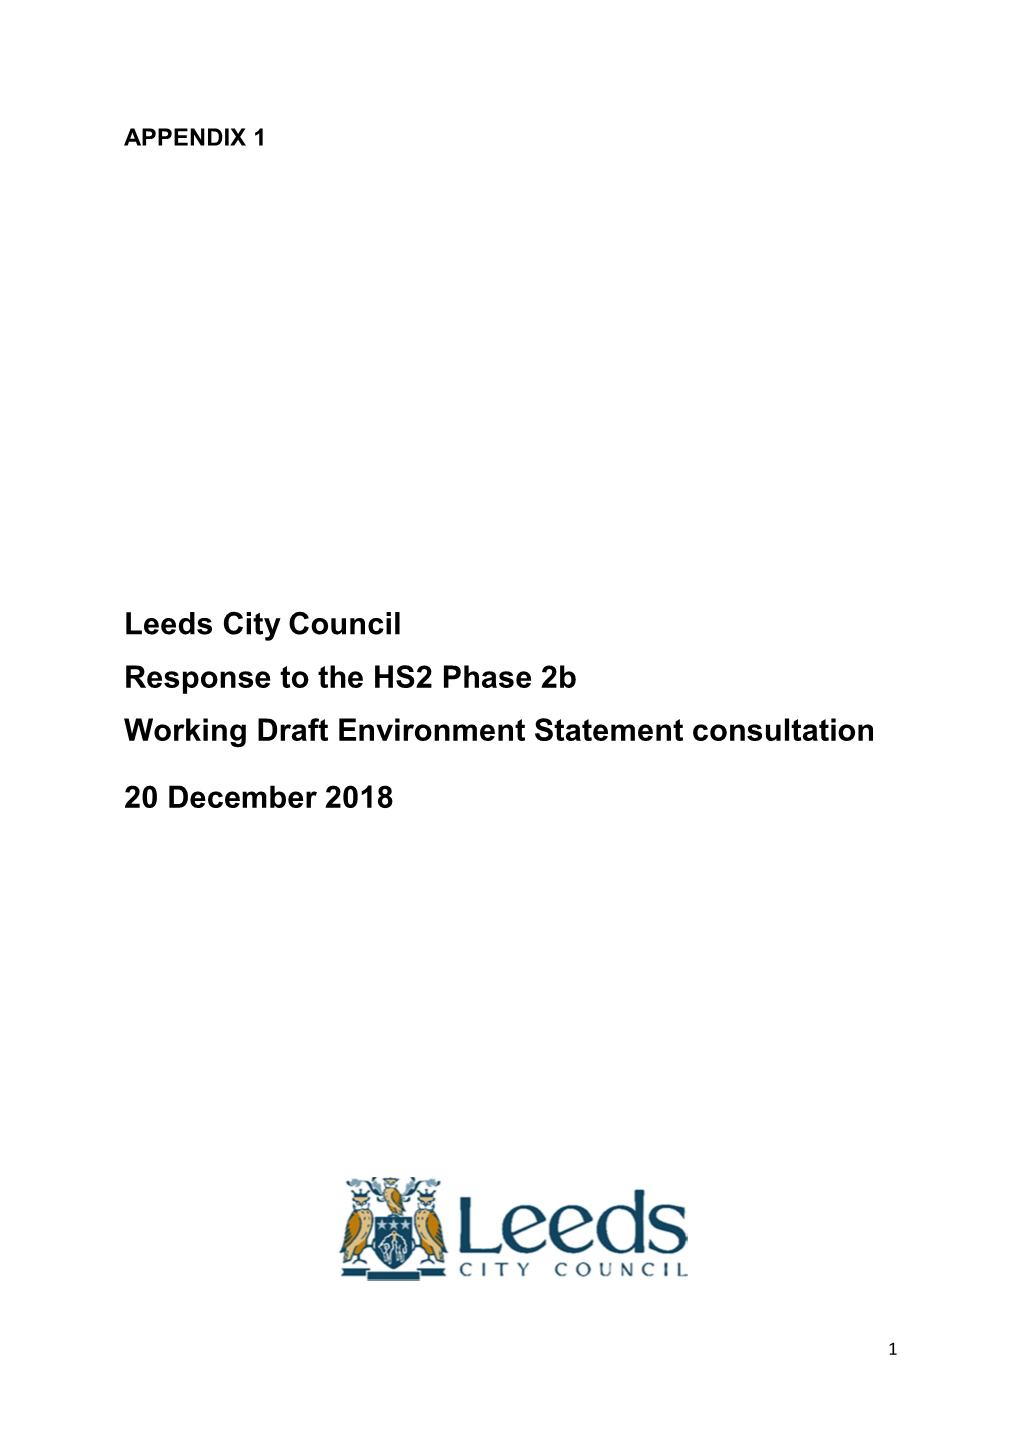 Leeds City Council Response to the HS2 Phase 2B Working Draft Environment Statement Consultation